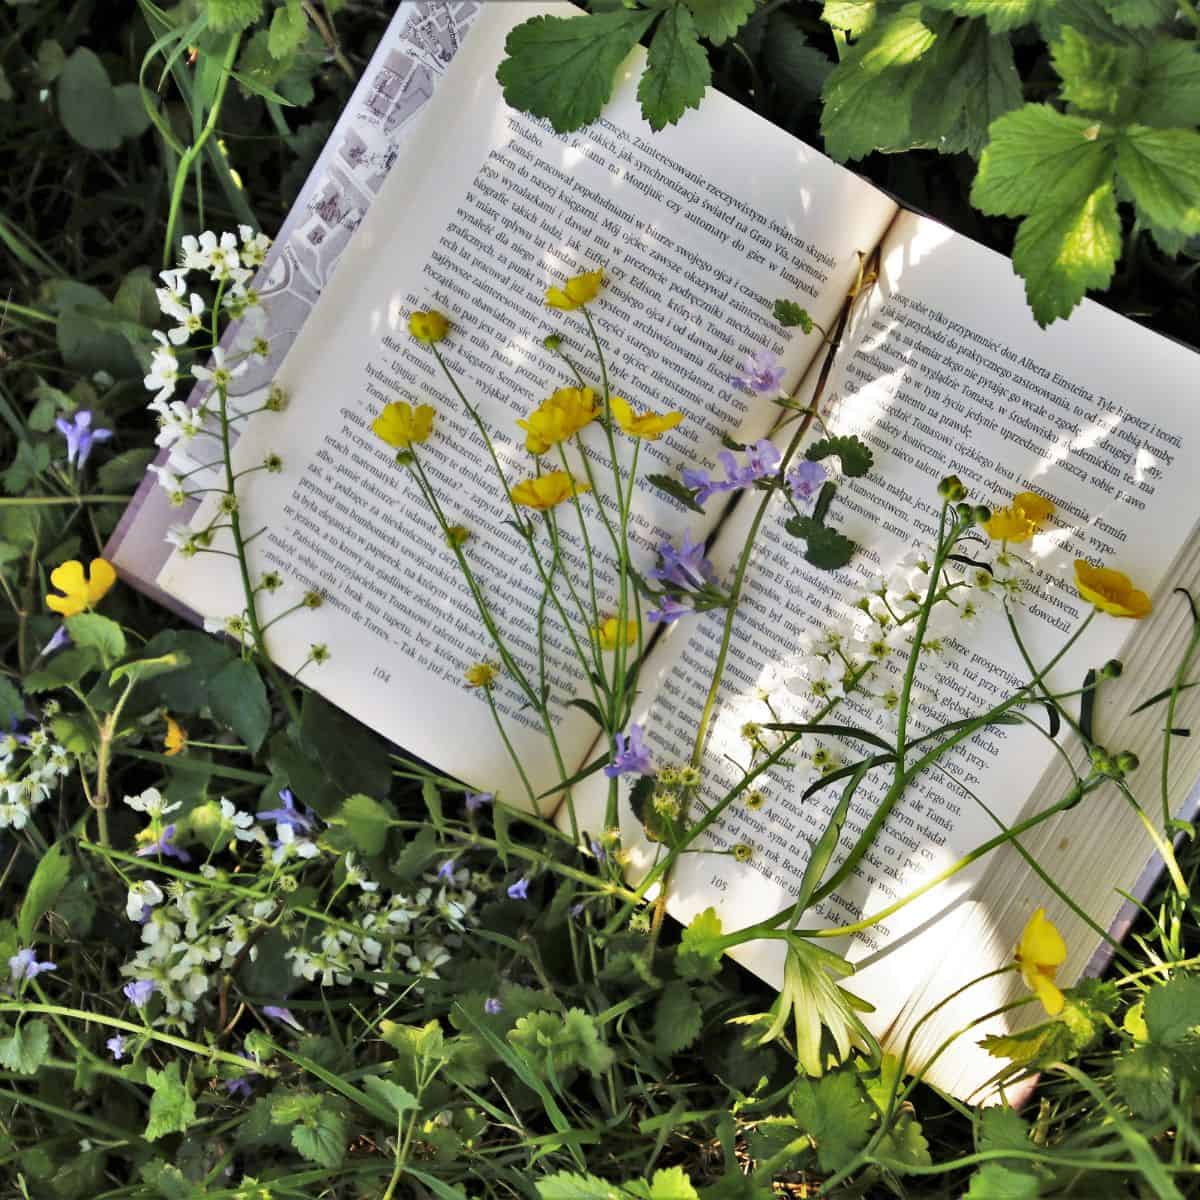 book in grass with flowers